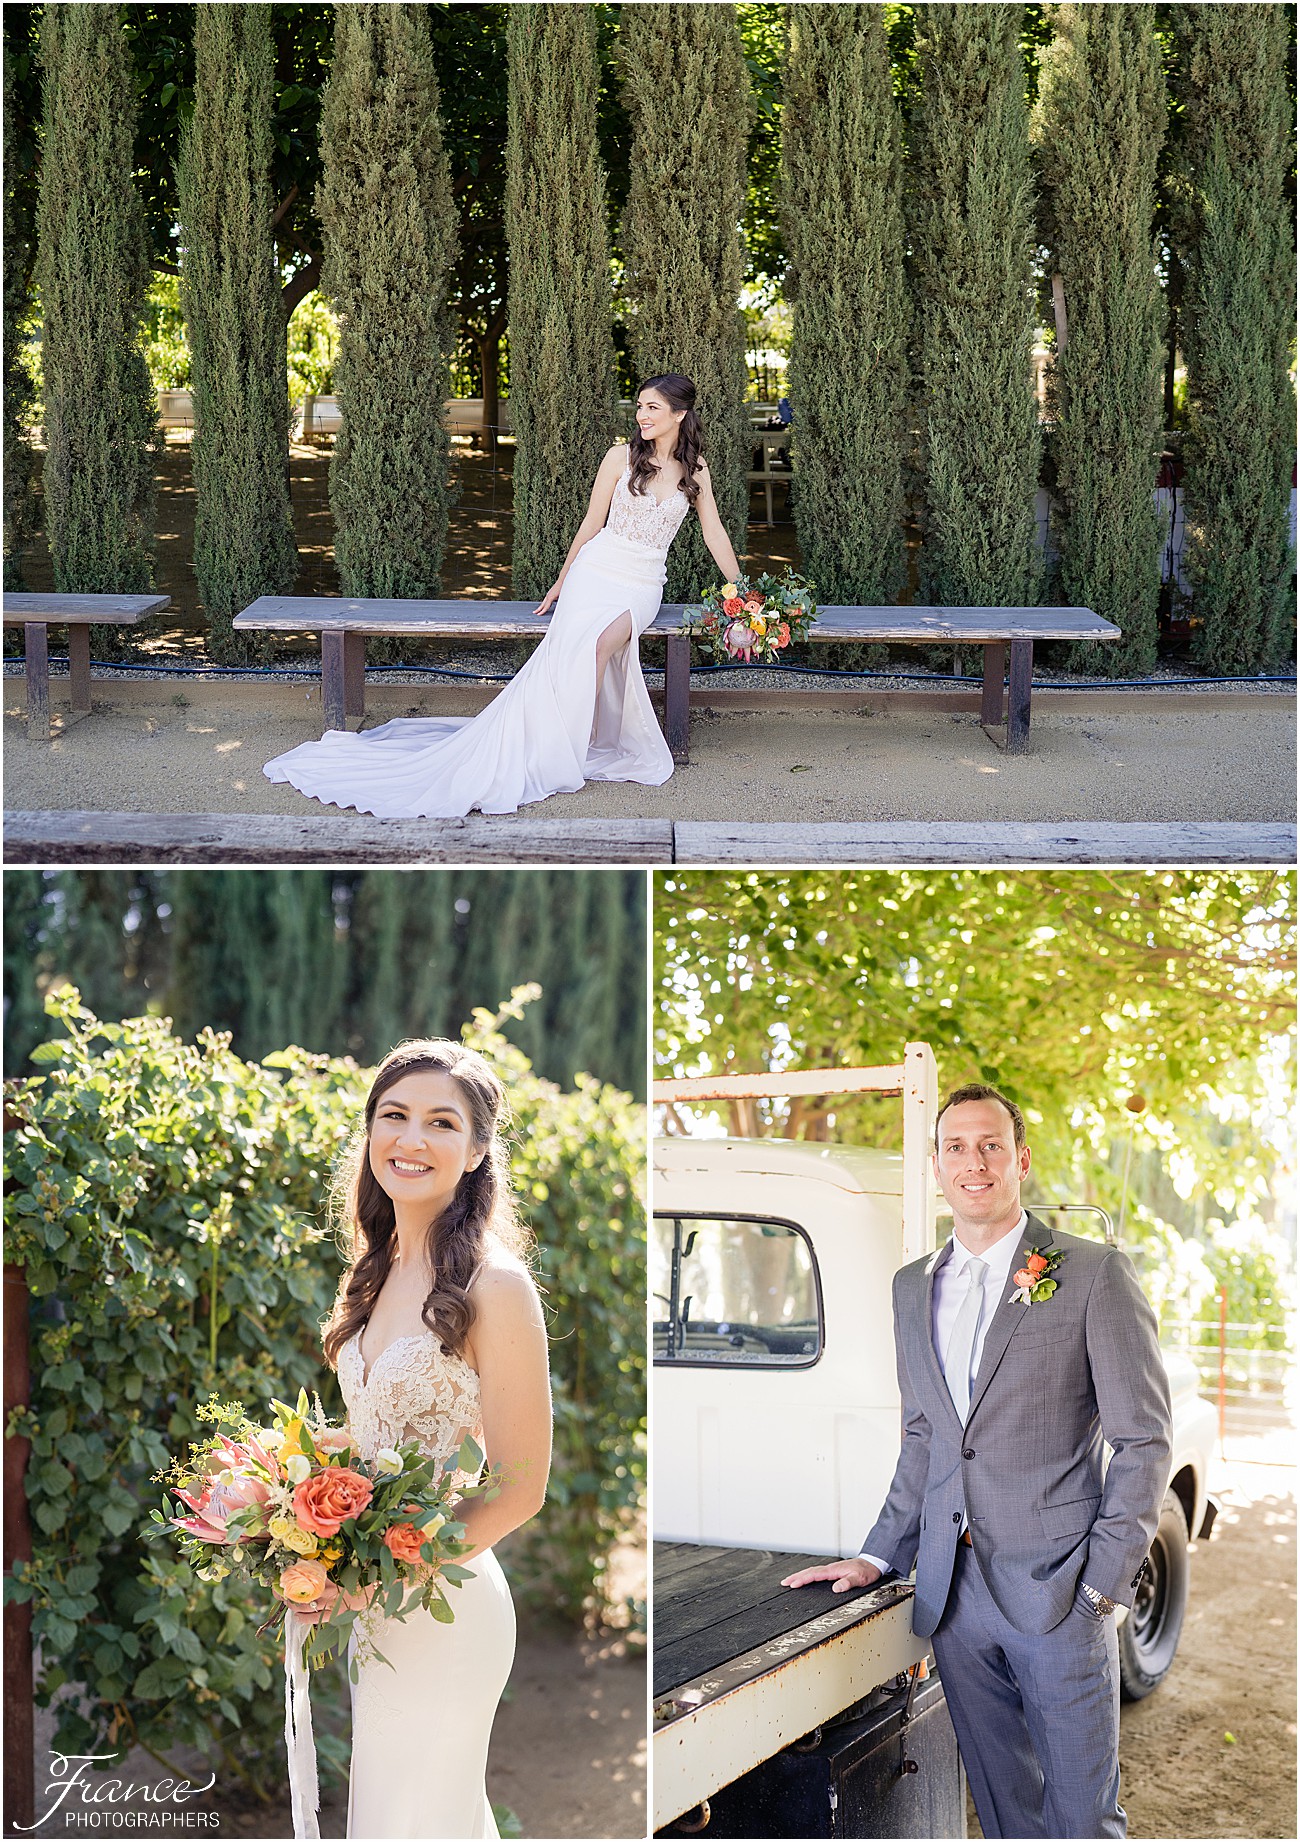 Peltzer Winery Temecula Spring Bride and Groom Portraits